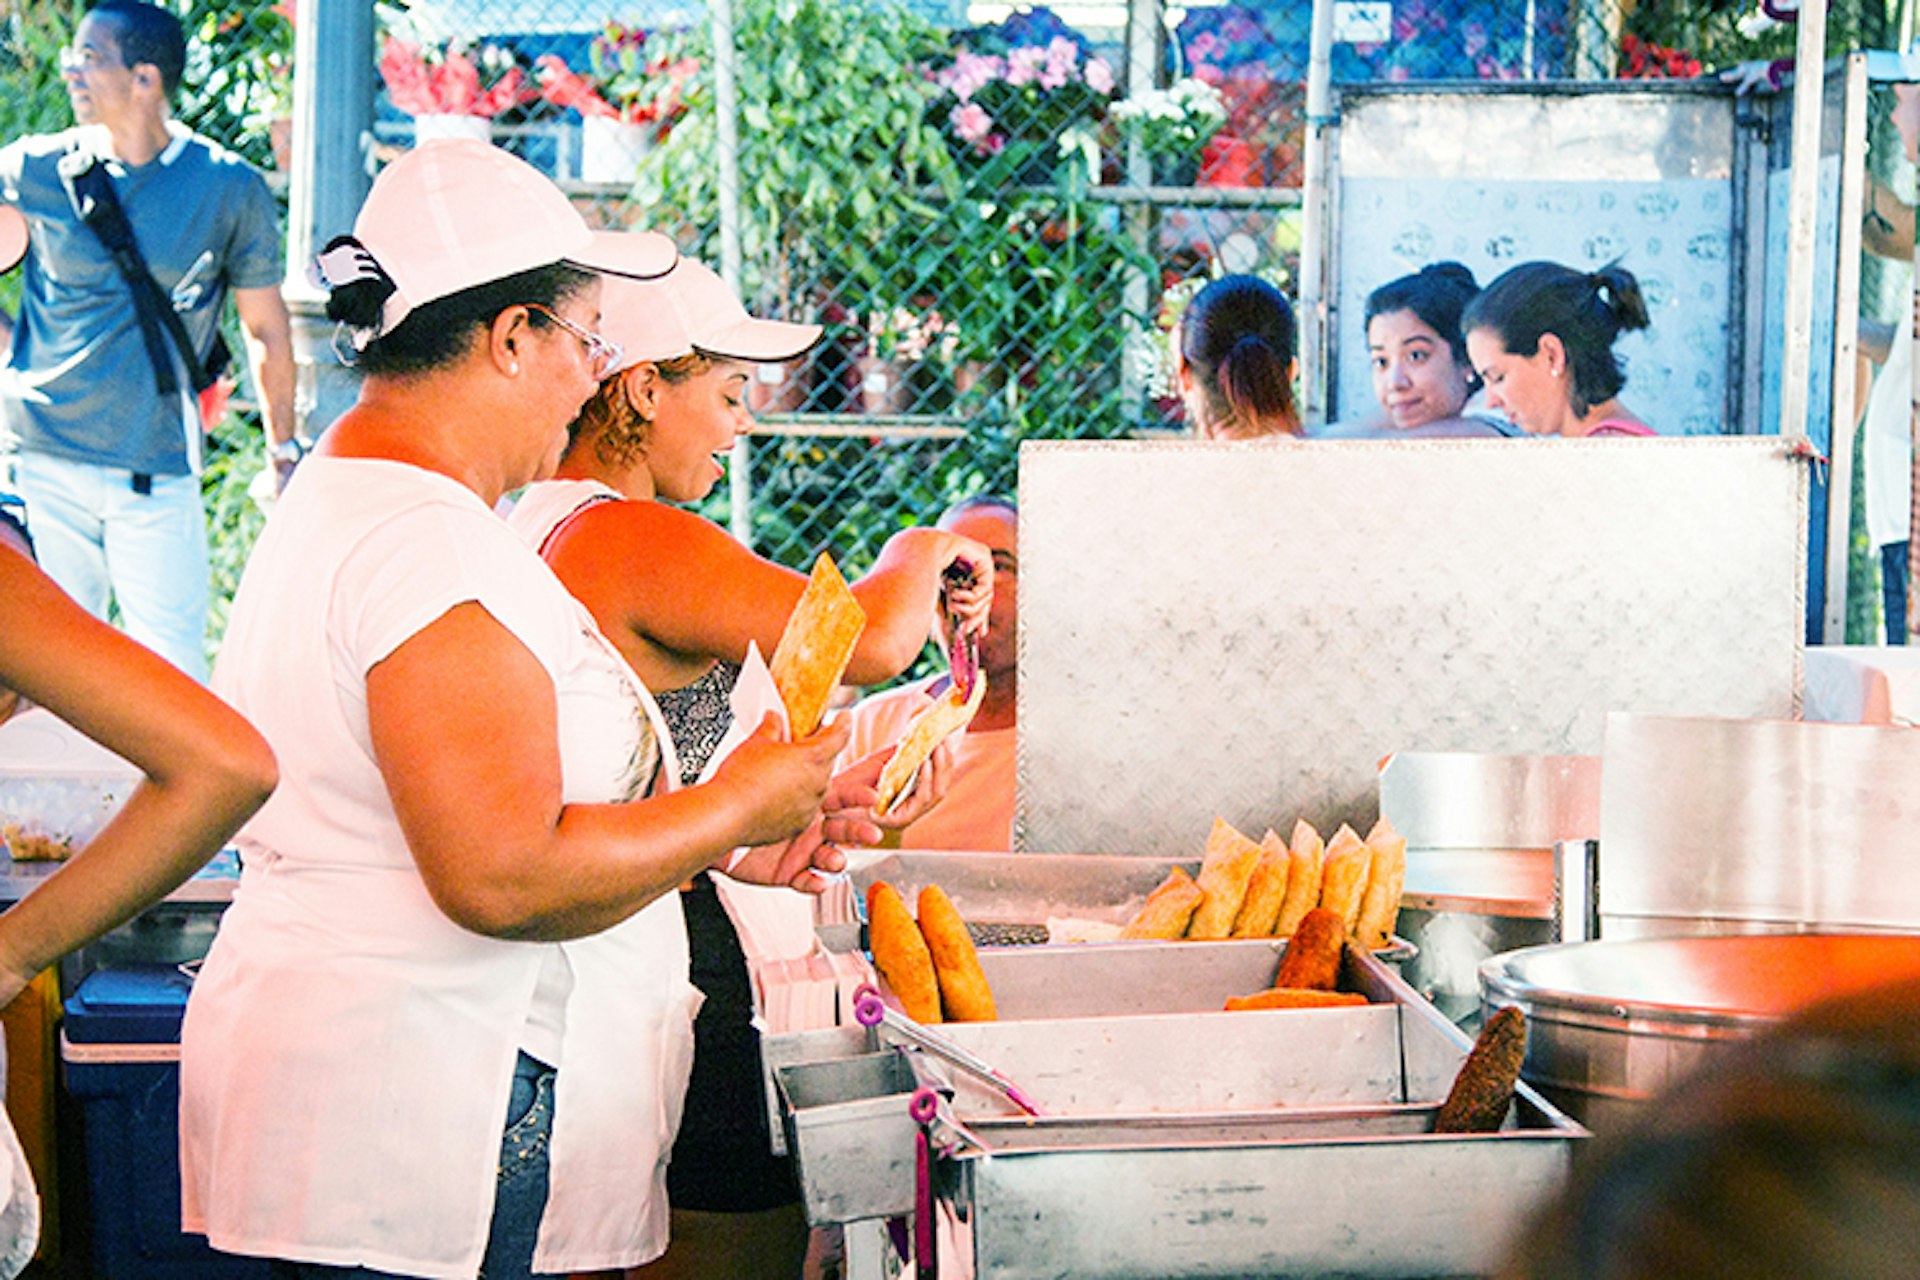 Pastels are a popular street food in Rio de Janeiro. Image by Teresa Geer / Lonely Planet